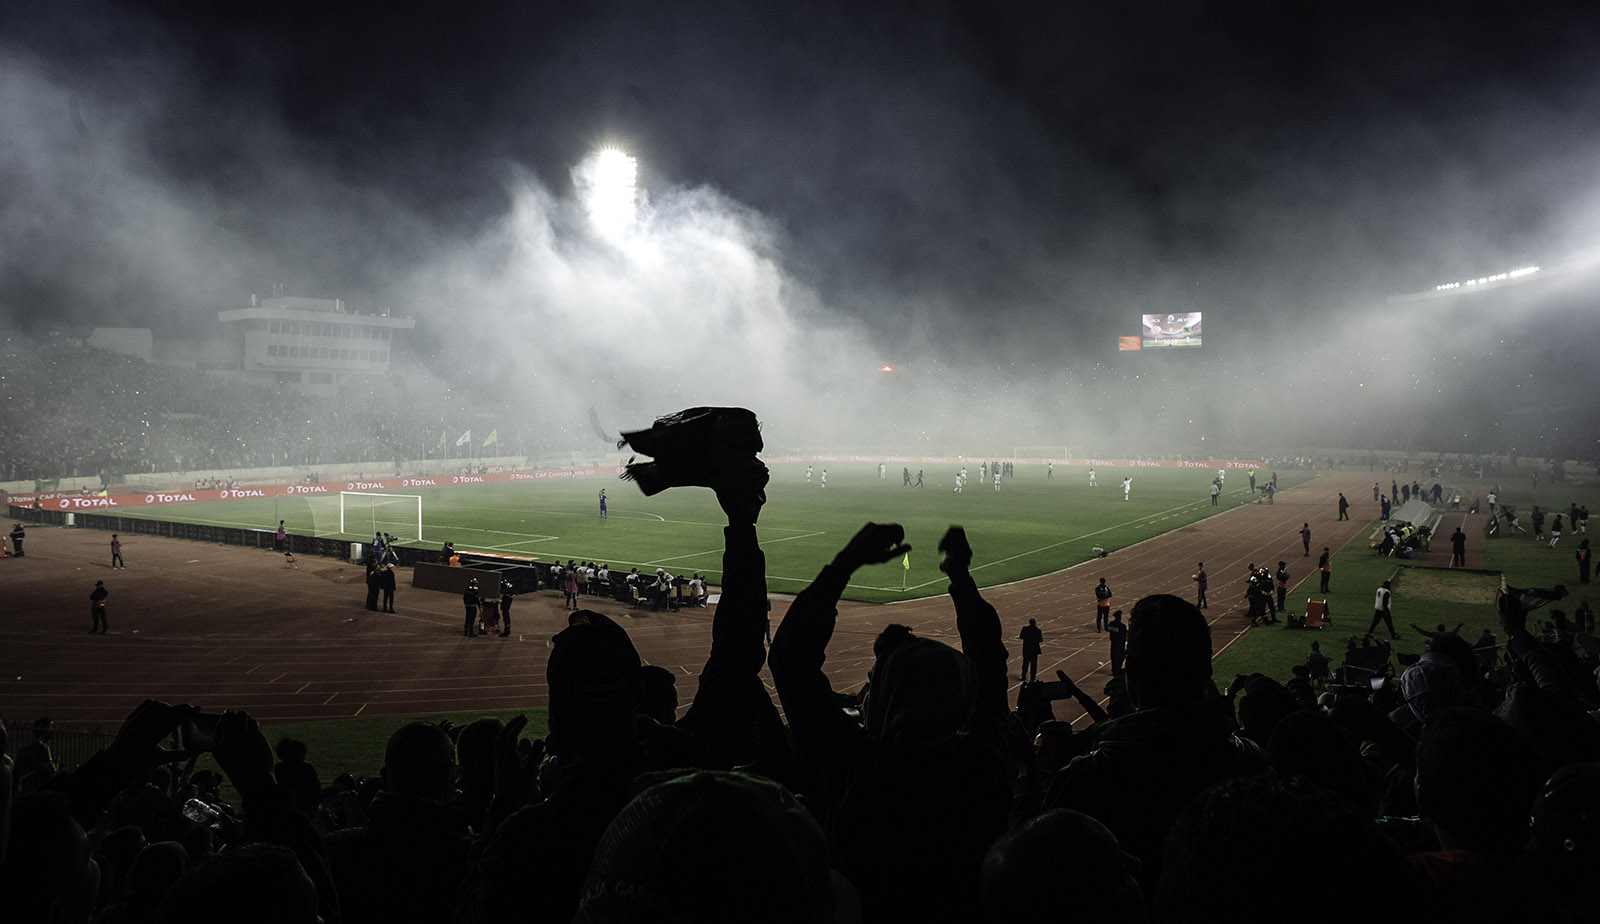 The “ultra” fans of Raja Casablanca lighting torches at a game in the Mohammed V stadium, Morocco, November 25, 2018